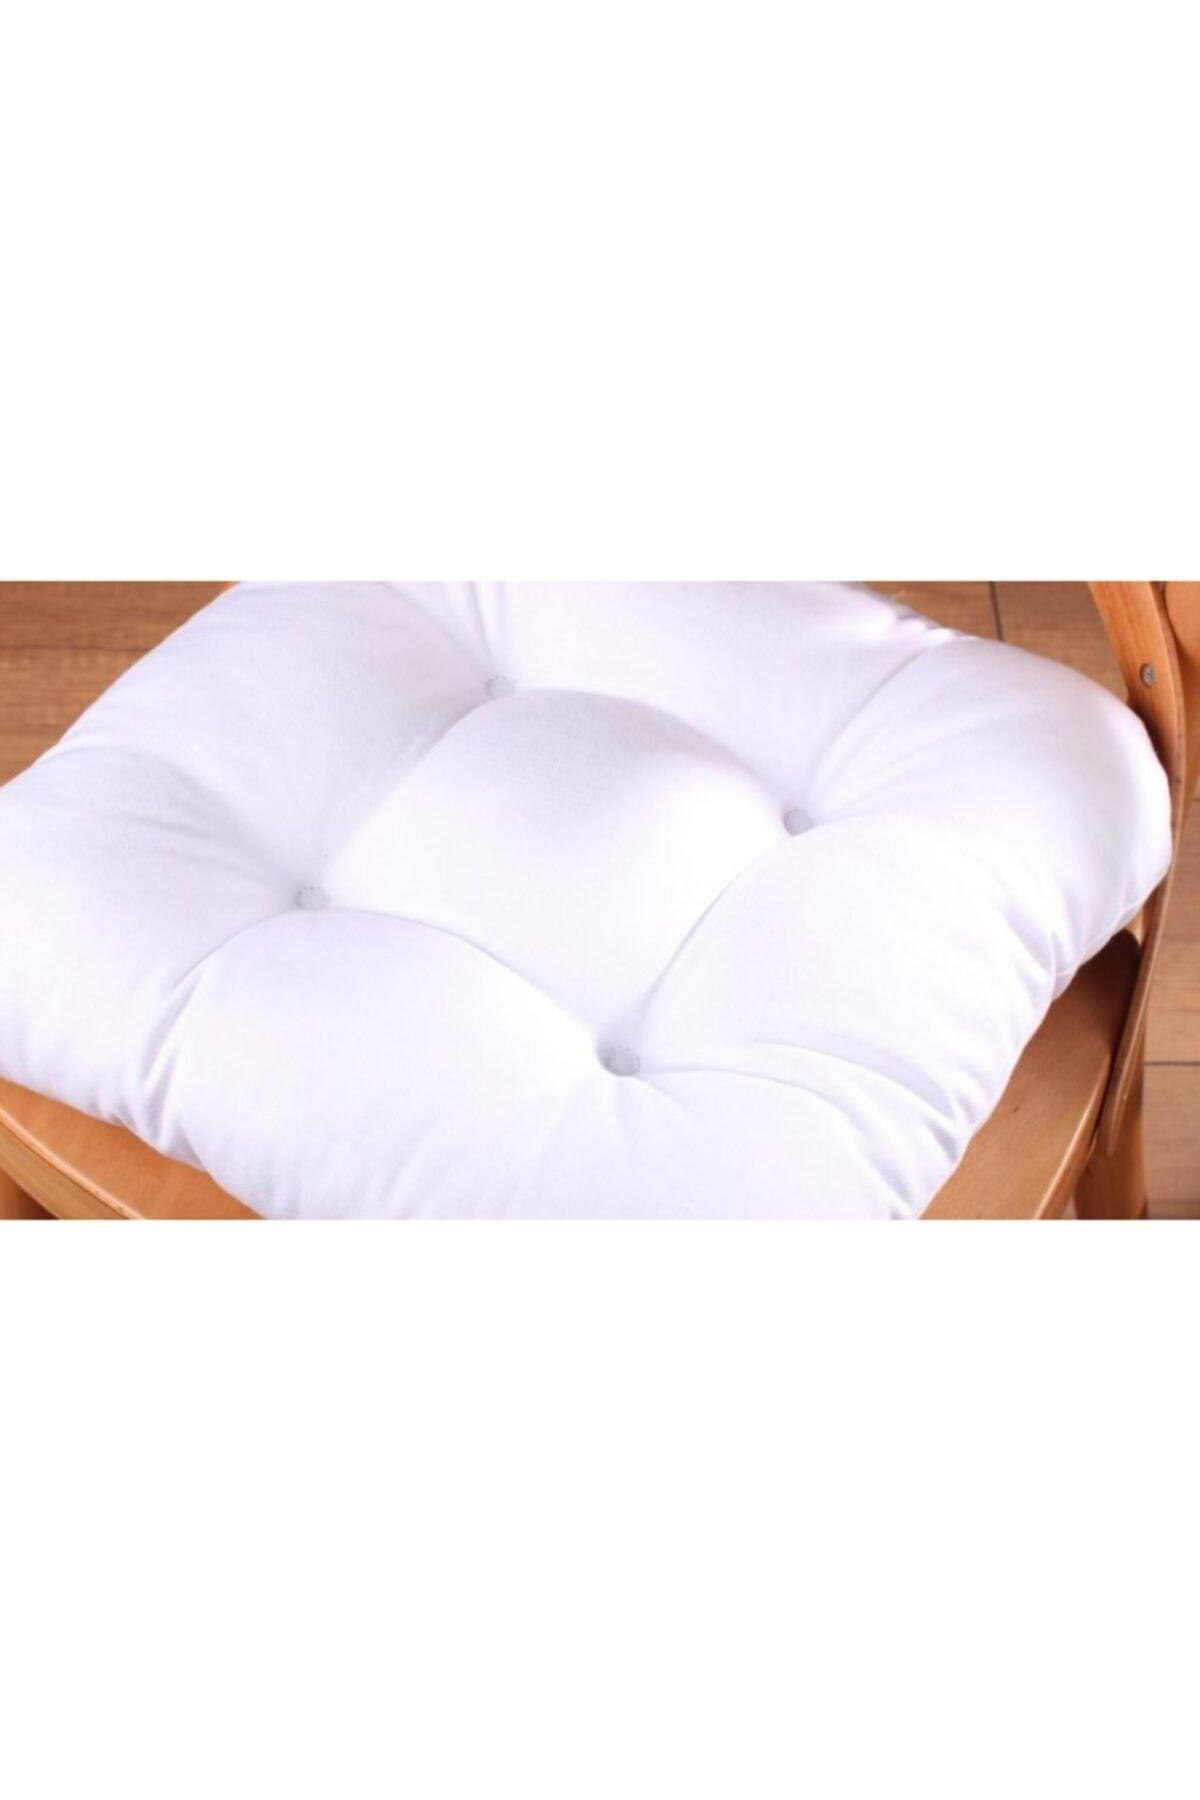 Lux Pofidik White Chair Cushion Special Stitched Laced 40x40cm - Swordslife